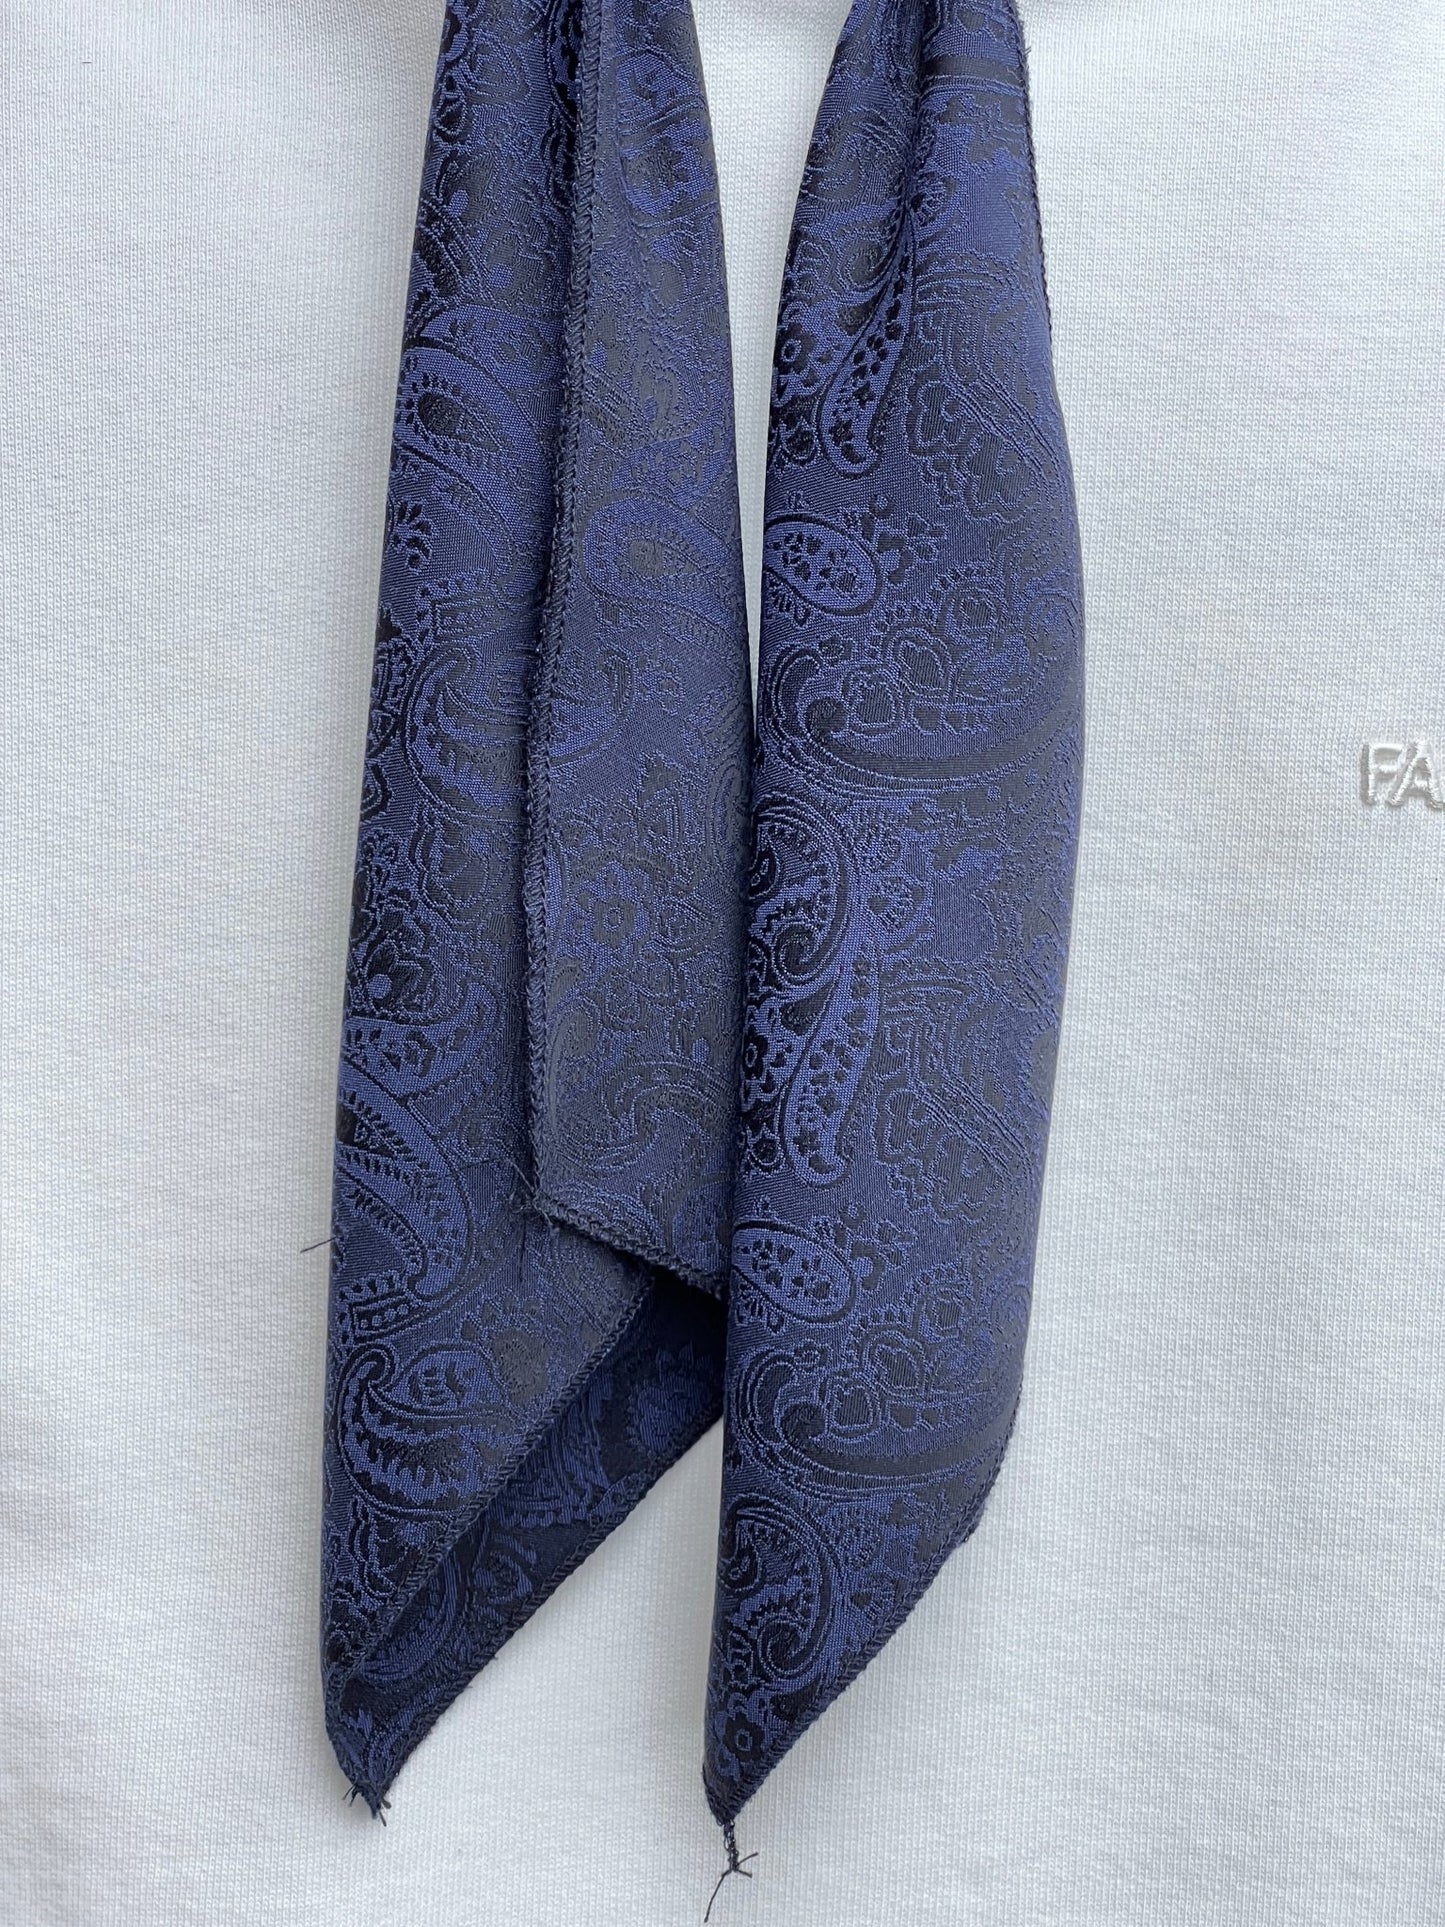 A dark blue paisley tie made in Italy draped against a light fabric background.